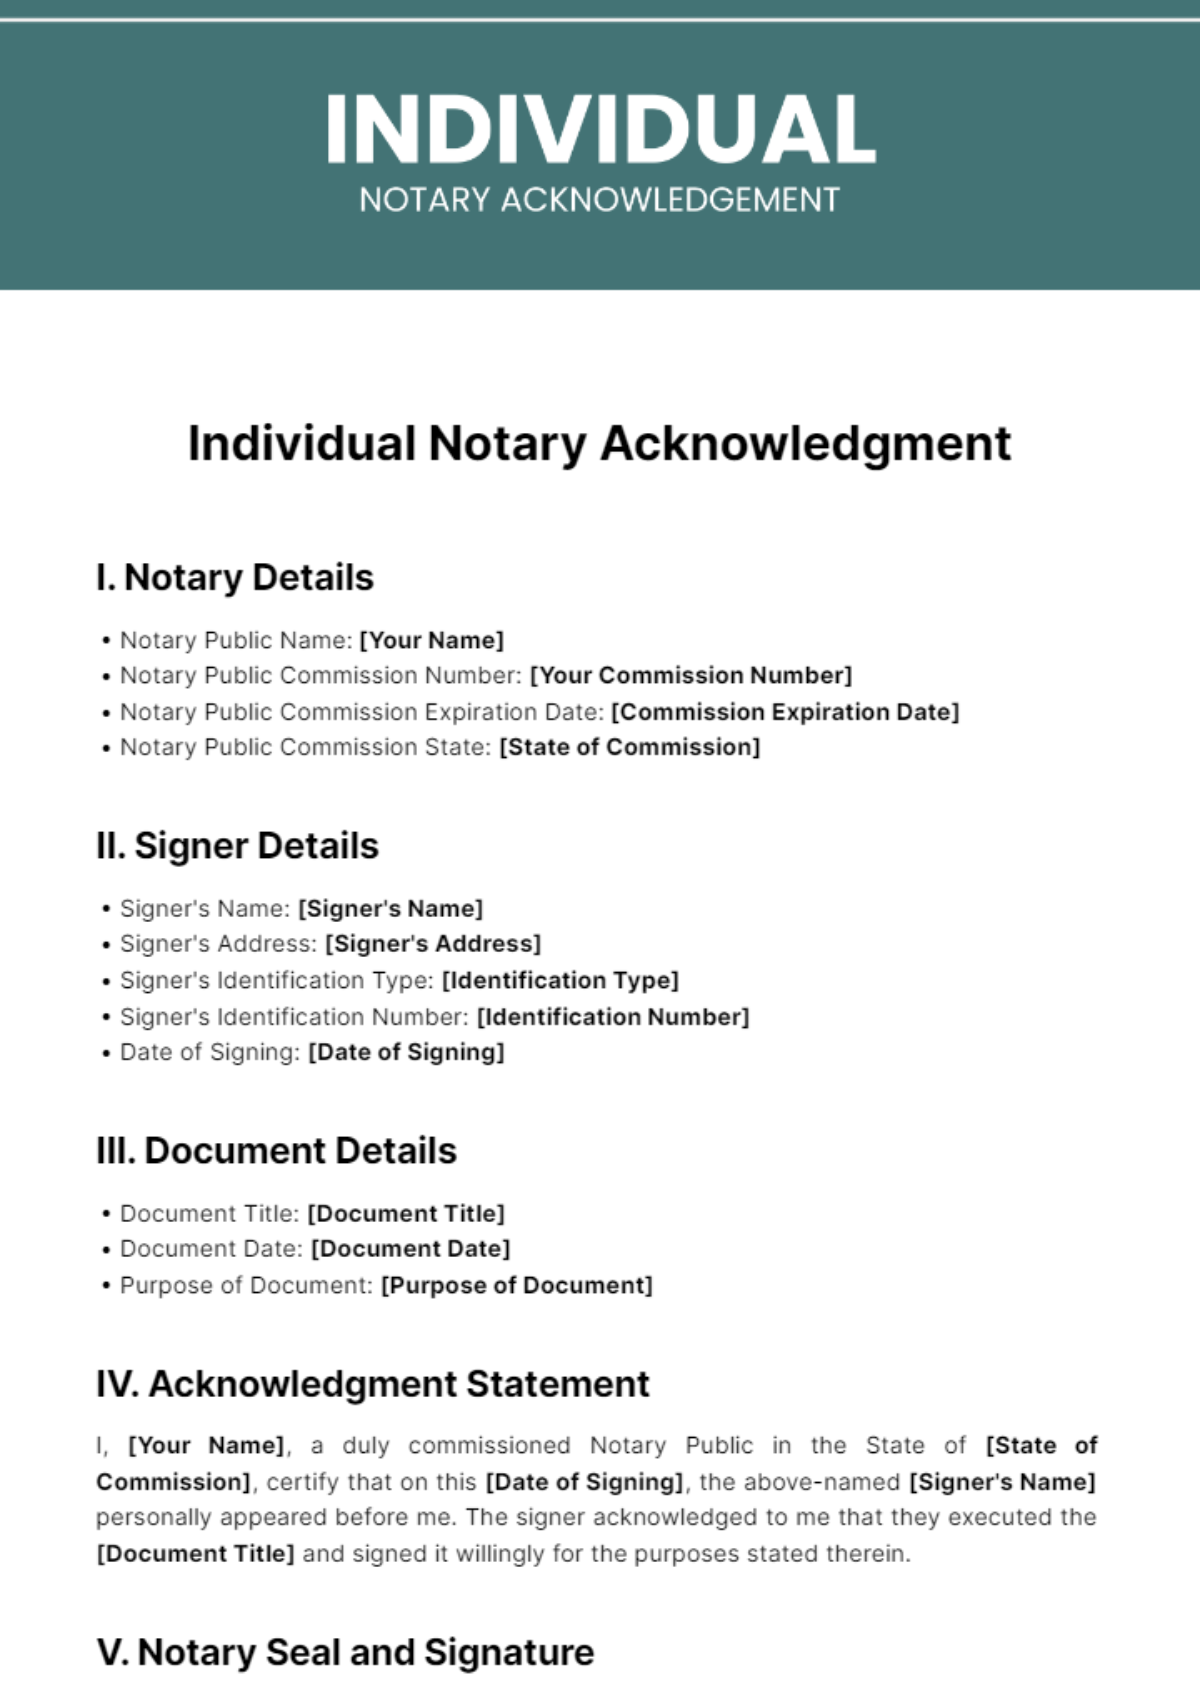 Free Individual Notary Acknowledgement Template